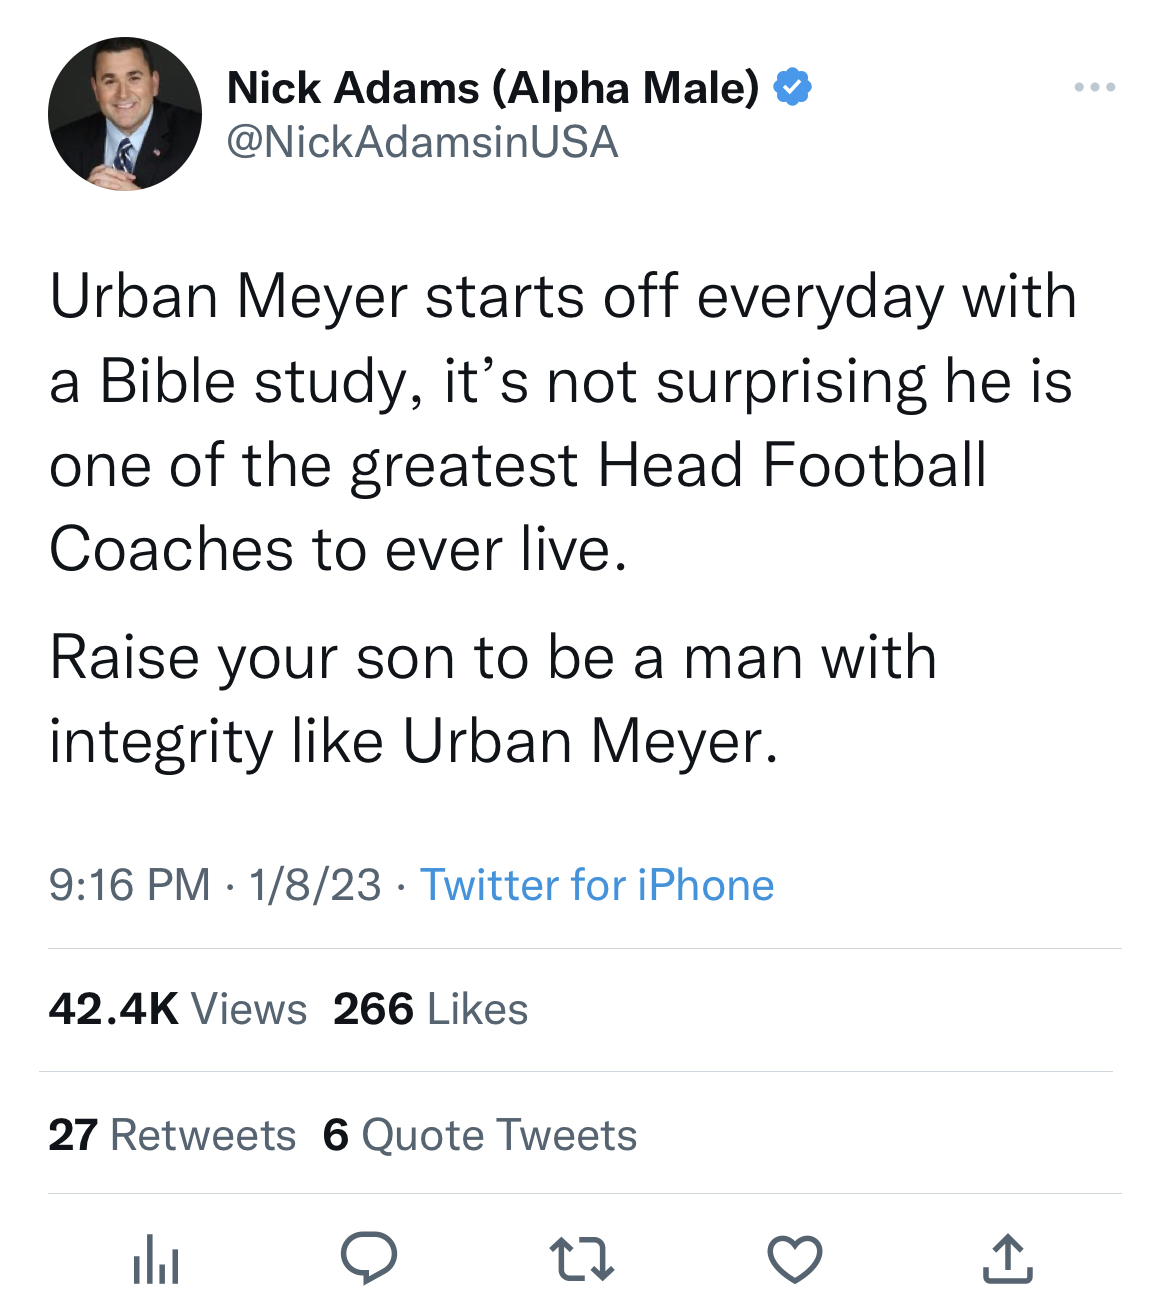 nick adams unhinged tweets - Facebook - Nick Adams Alpha Male Urban Meyer starts off everyday with a Bible study, it's not surprising he is one of the greatest Head Football Coaches to ever live. Raise your son to be a man with integrity Urban Meyer. 1823